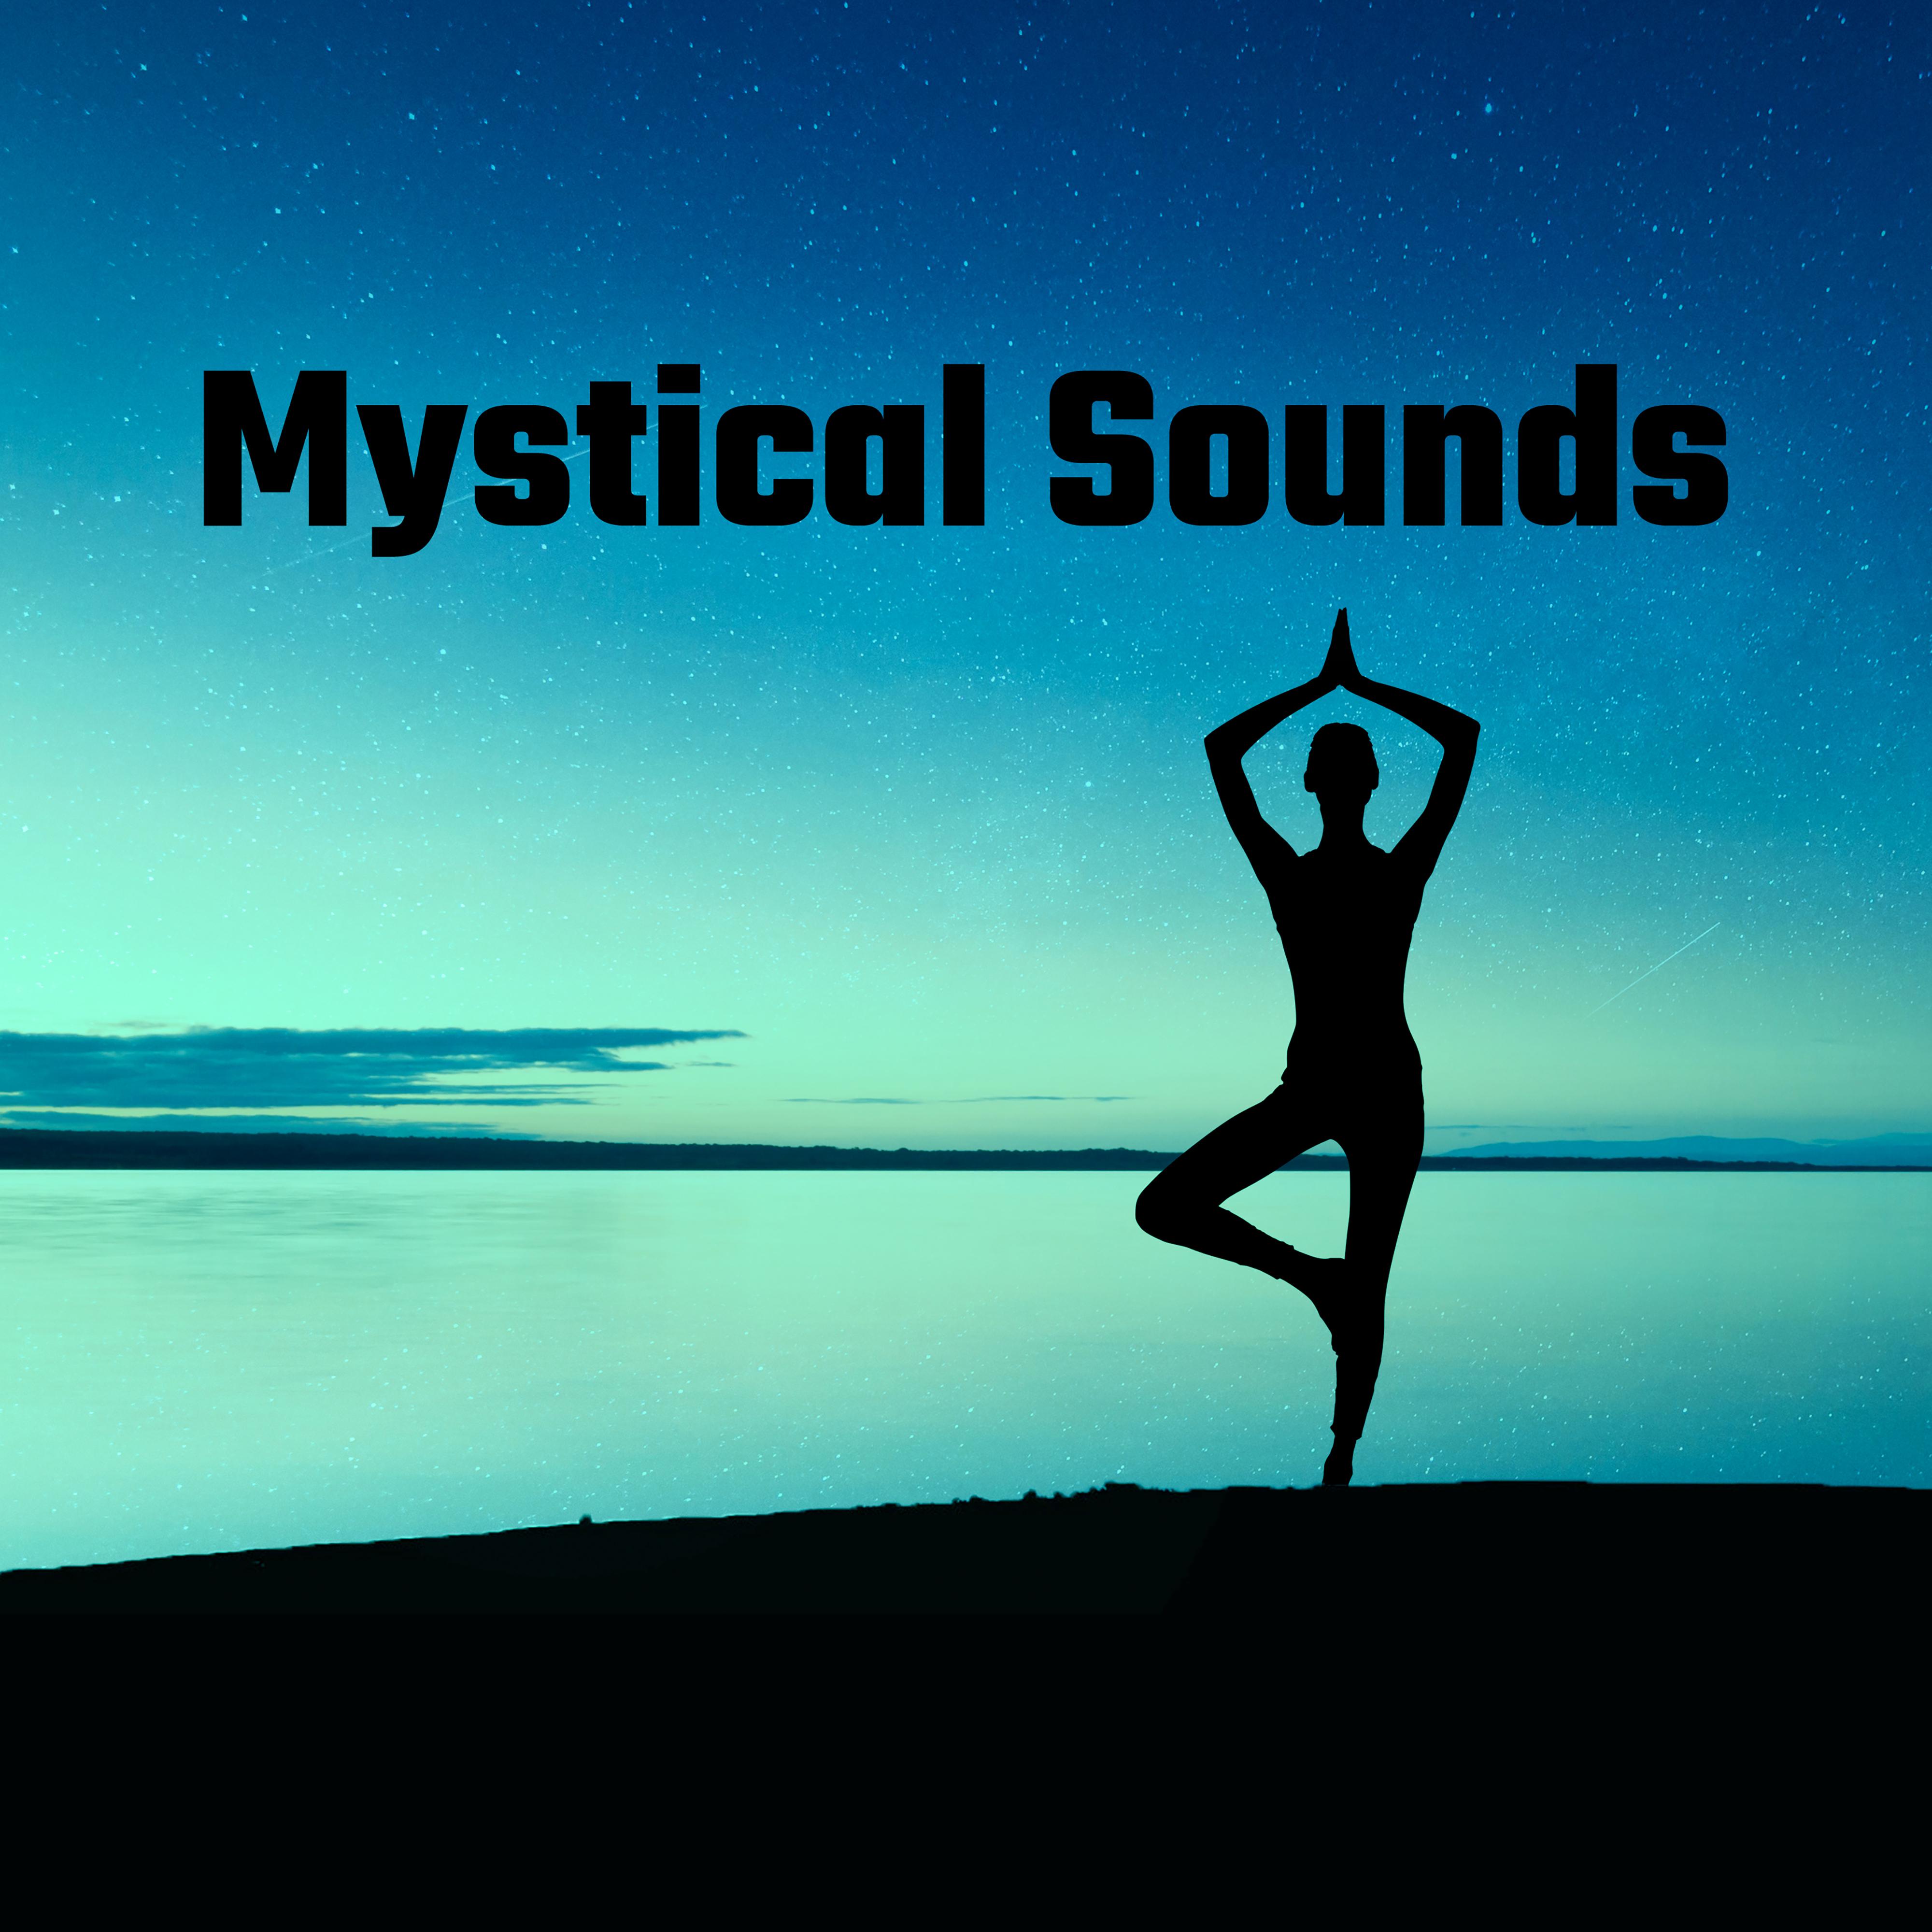 Mystical Sounds  Training Yoga, Meditation Music, Reiki, Zen, Relaxation, Nature Sounds to Rest, Peaceful Mind